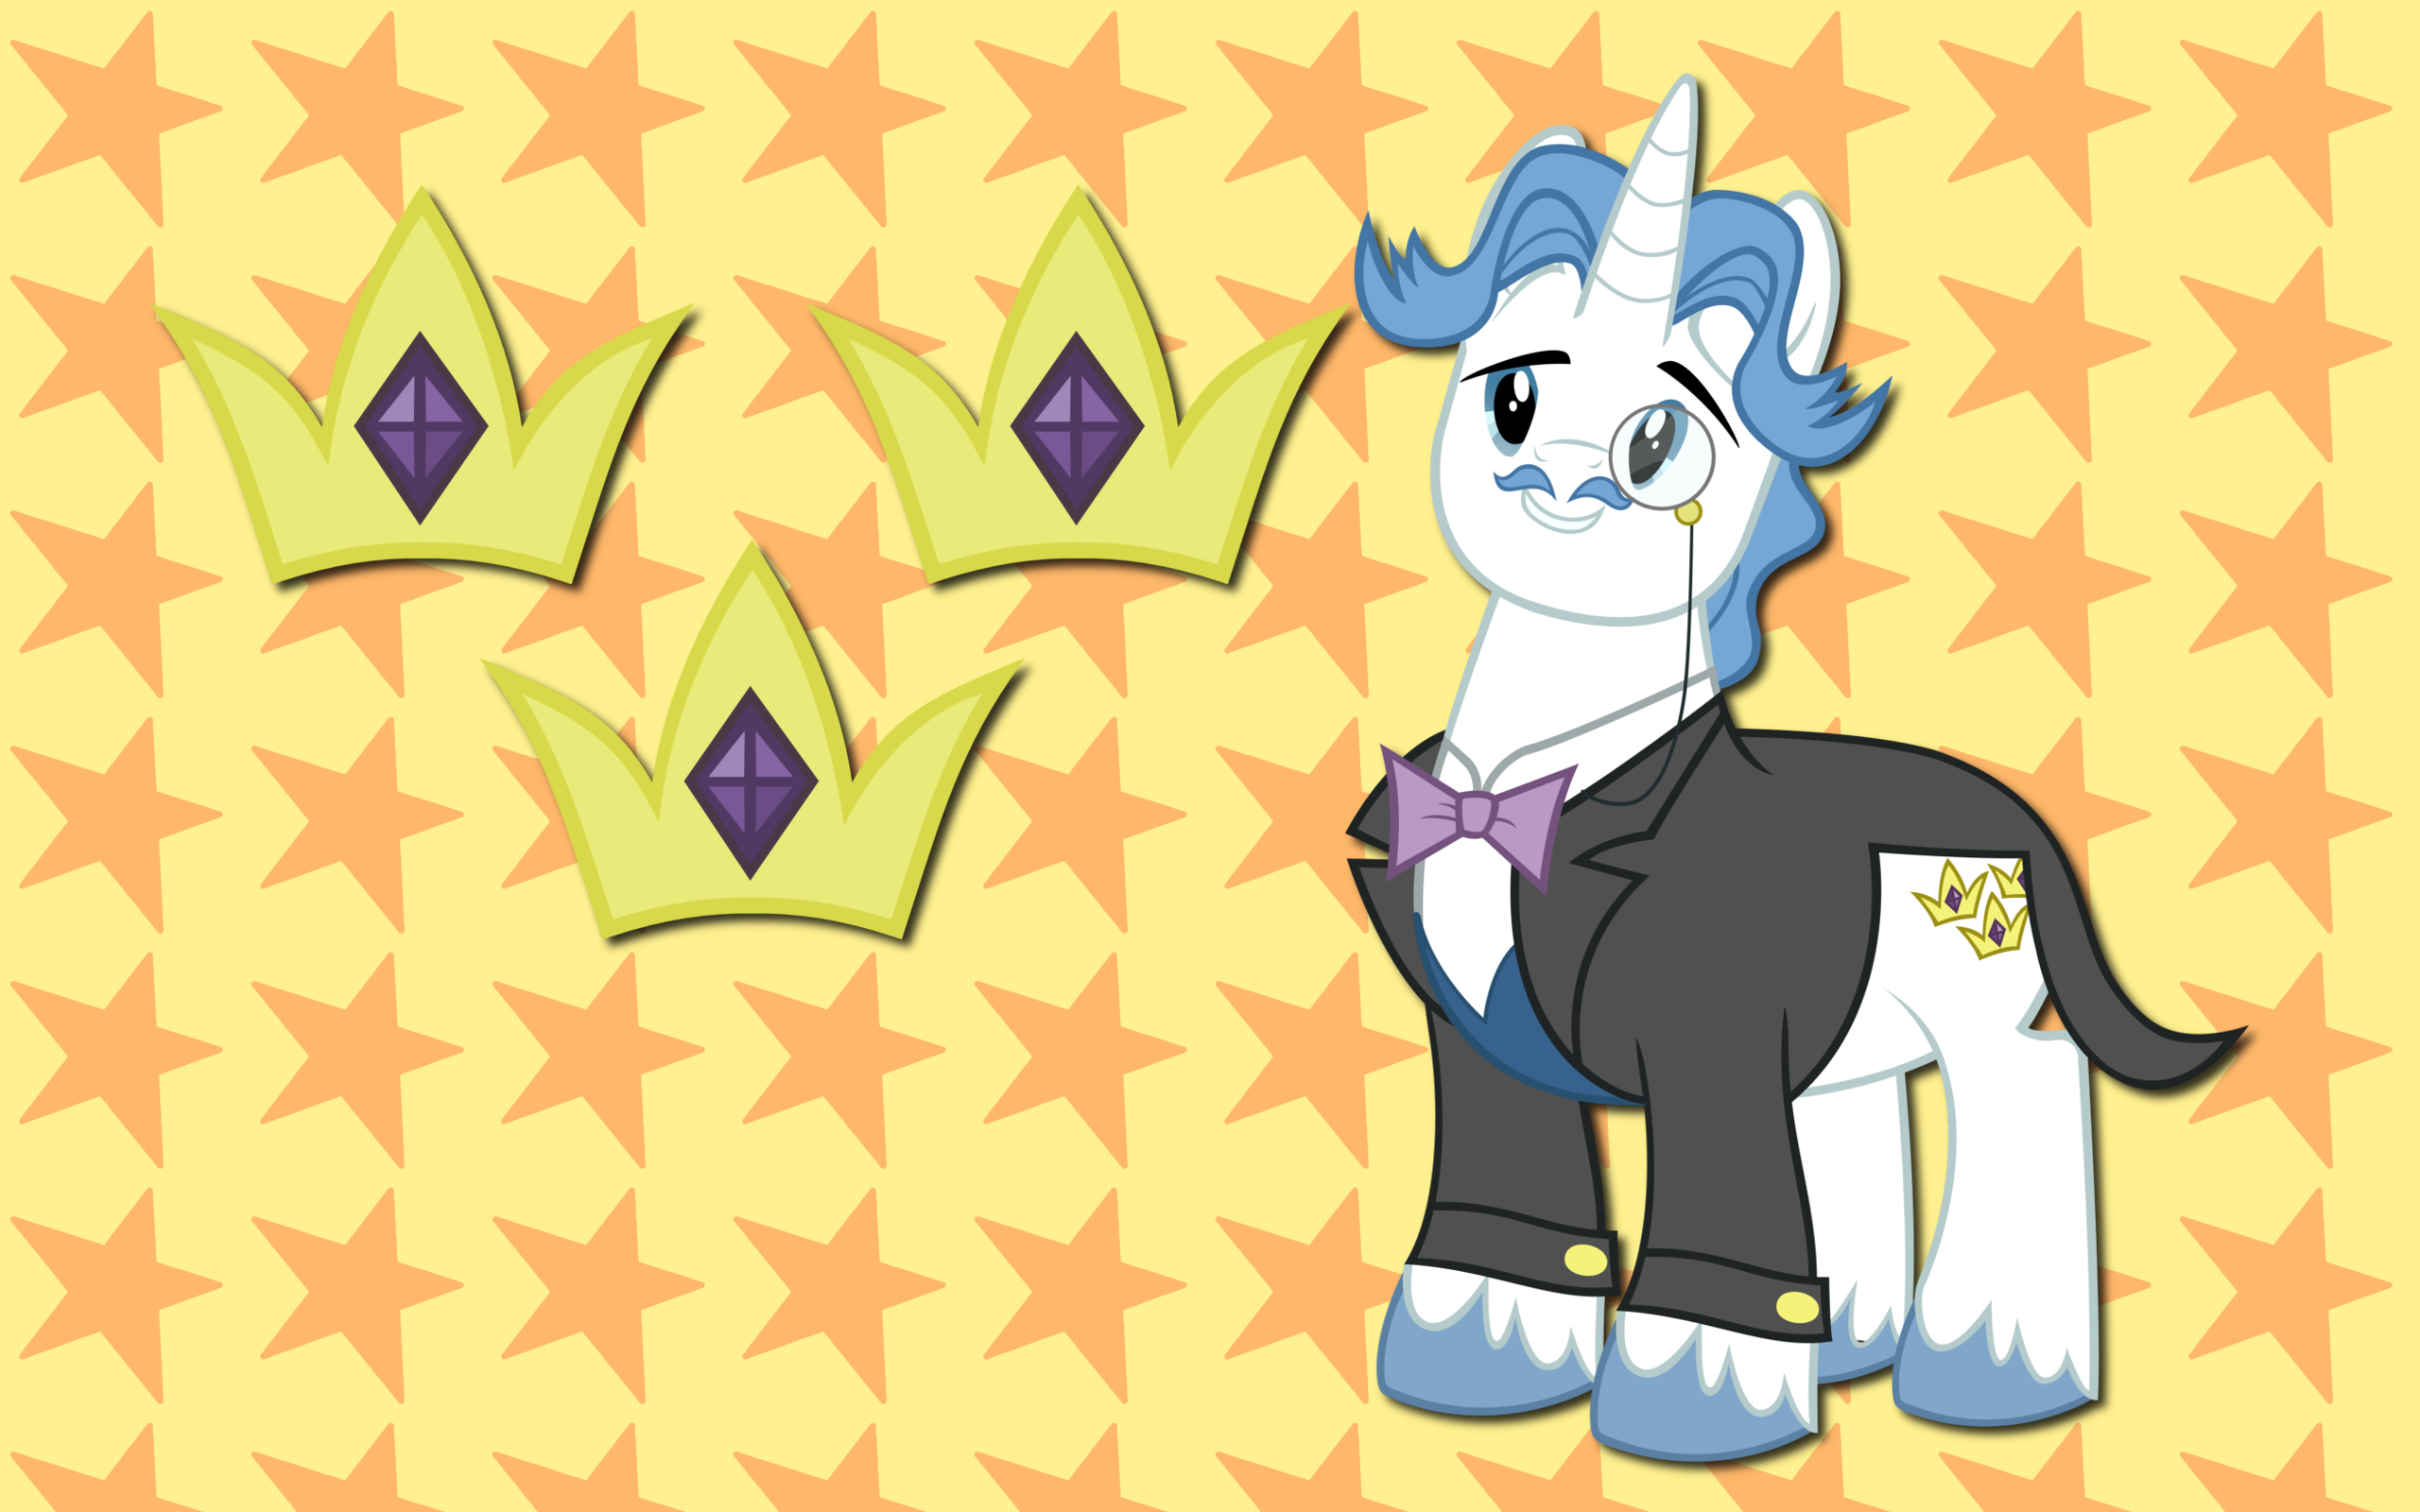 Fancy Pants WP by AliceHumanSacrifice0, MisterLolrus and The-Smiling-Pony